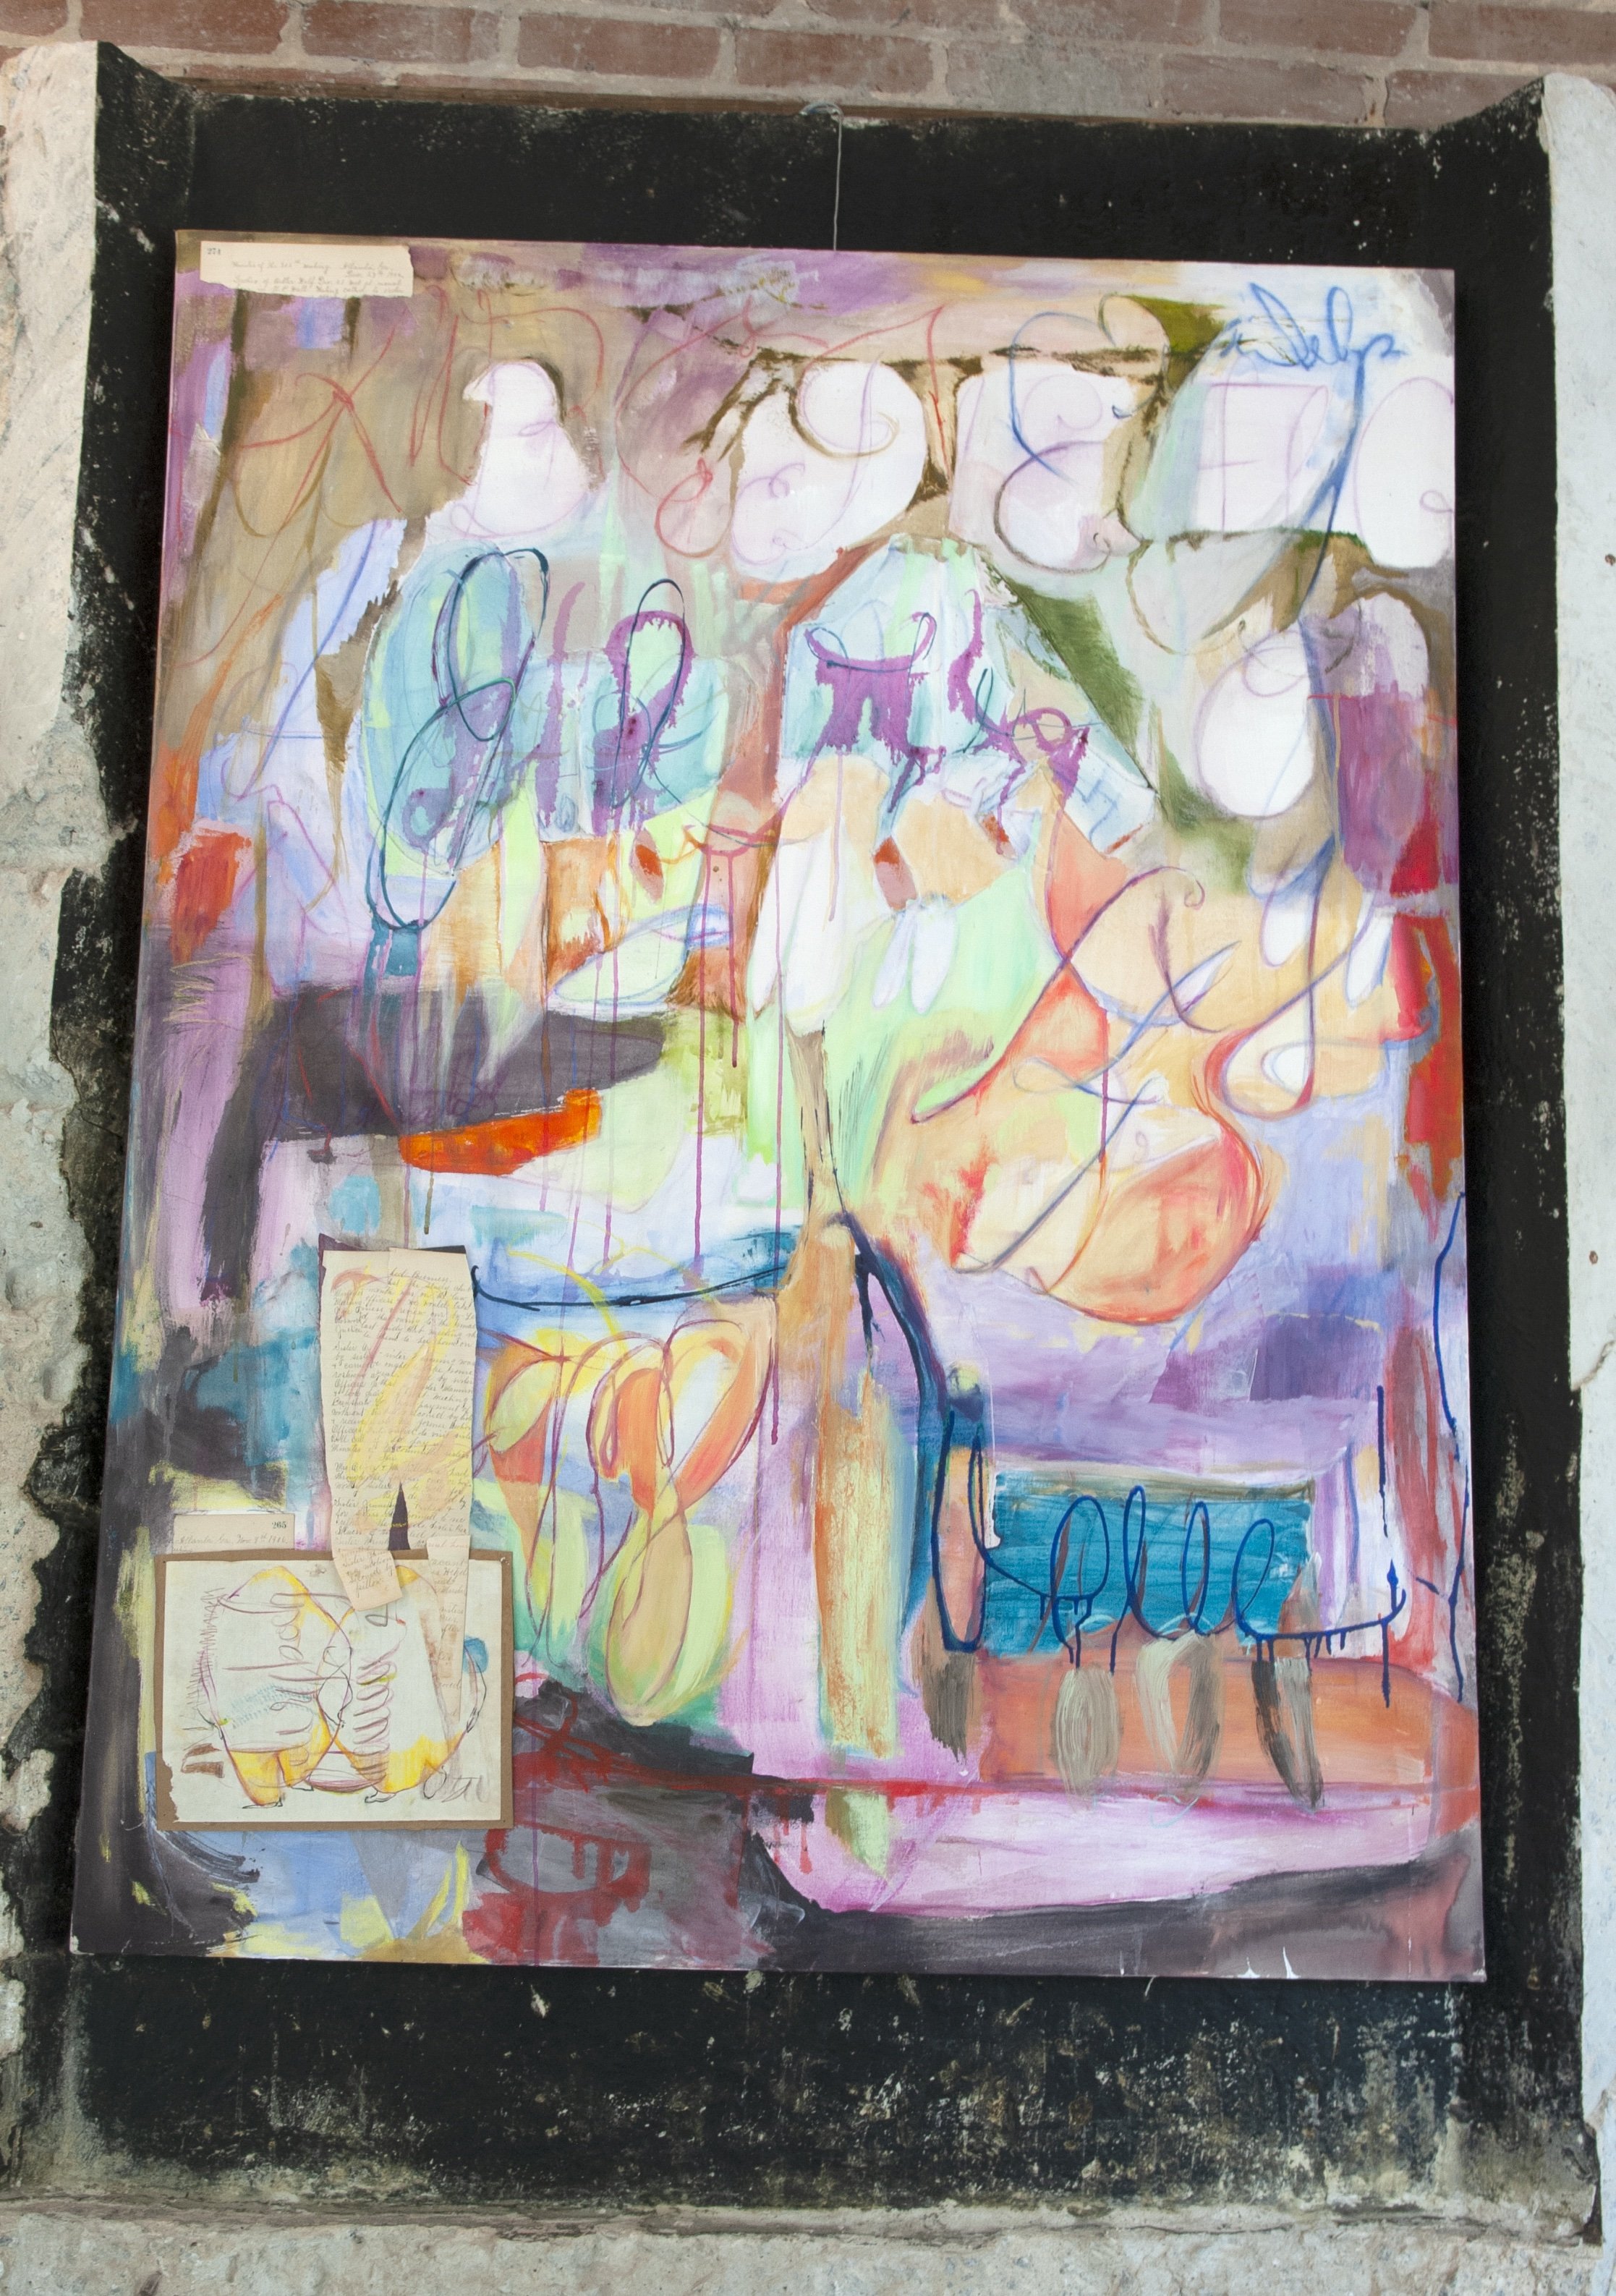   Letter Relics, 2023, Diptych   54 x 60 inches   Acrylic, crayon, estate sale paper on canvas     